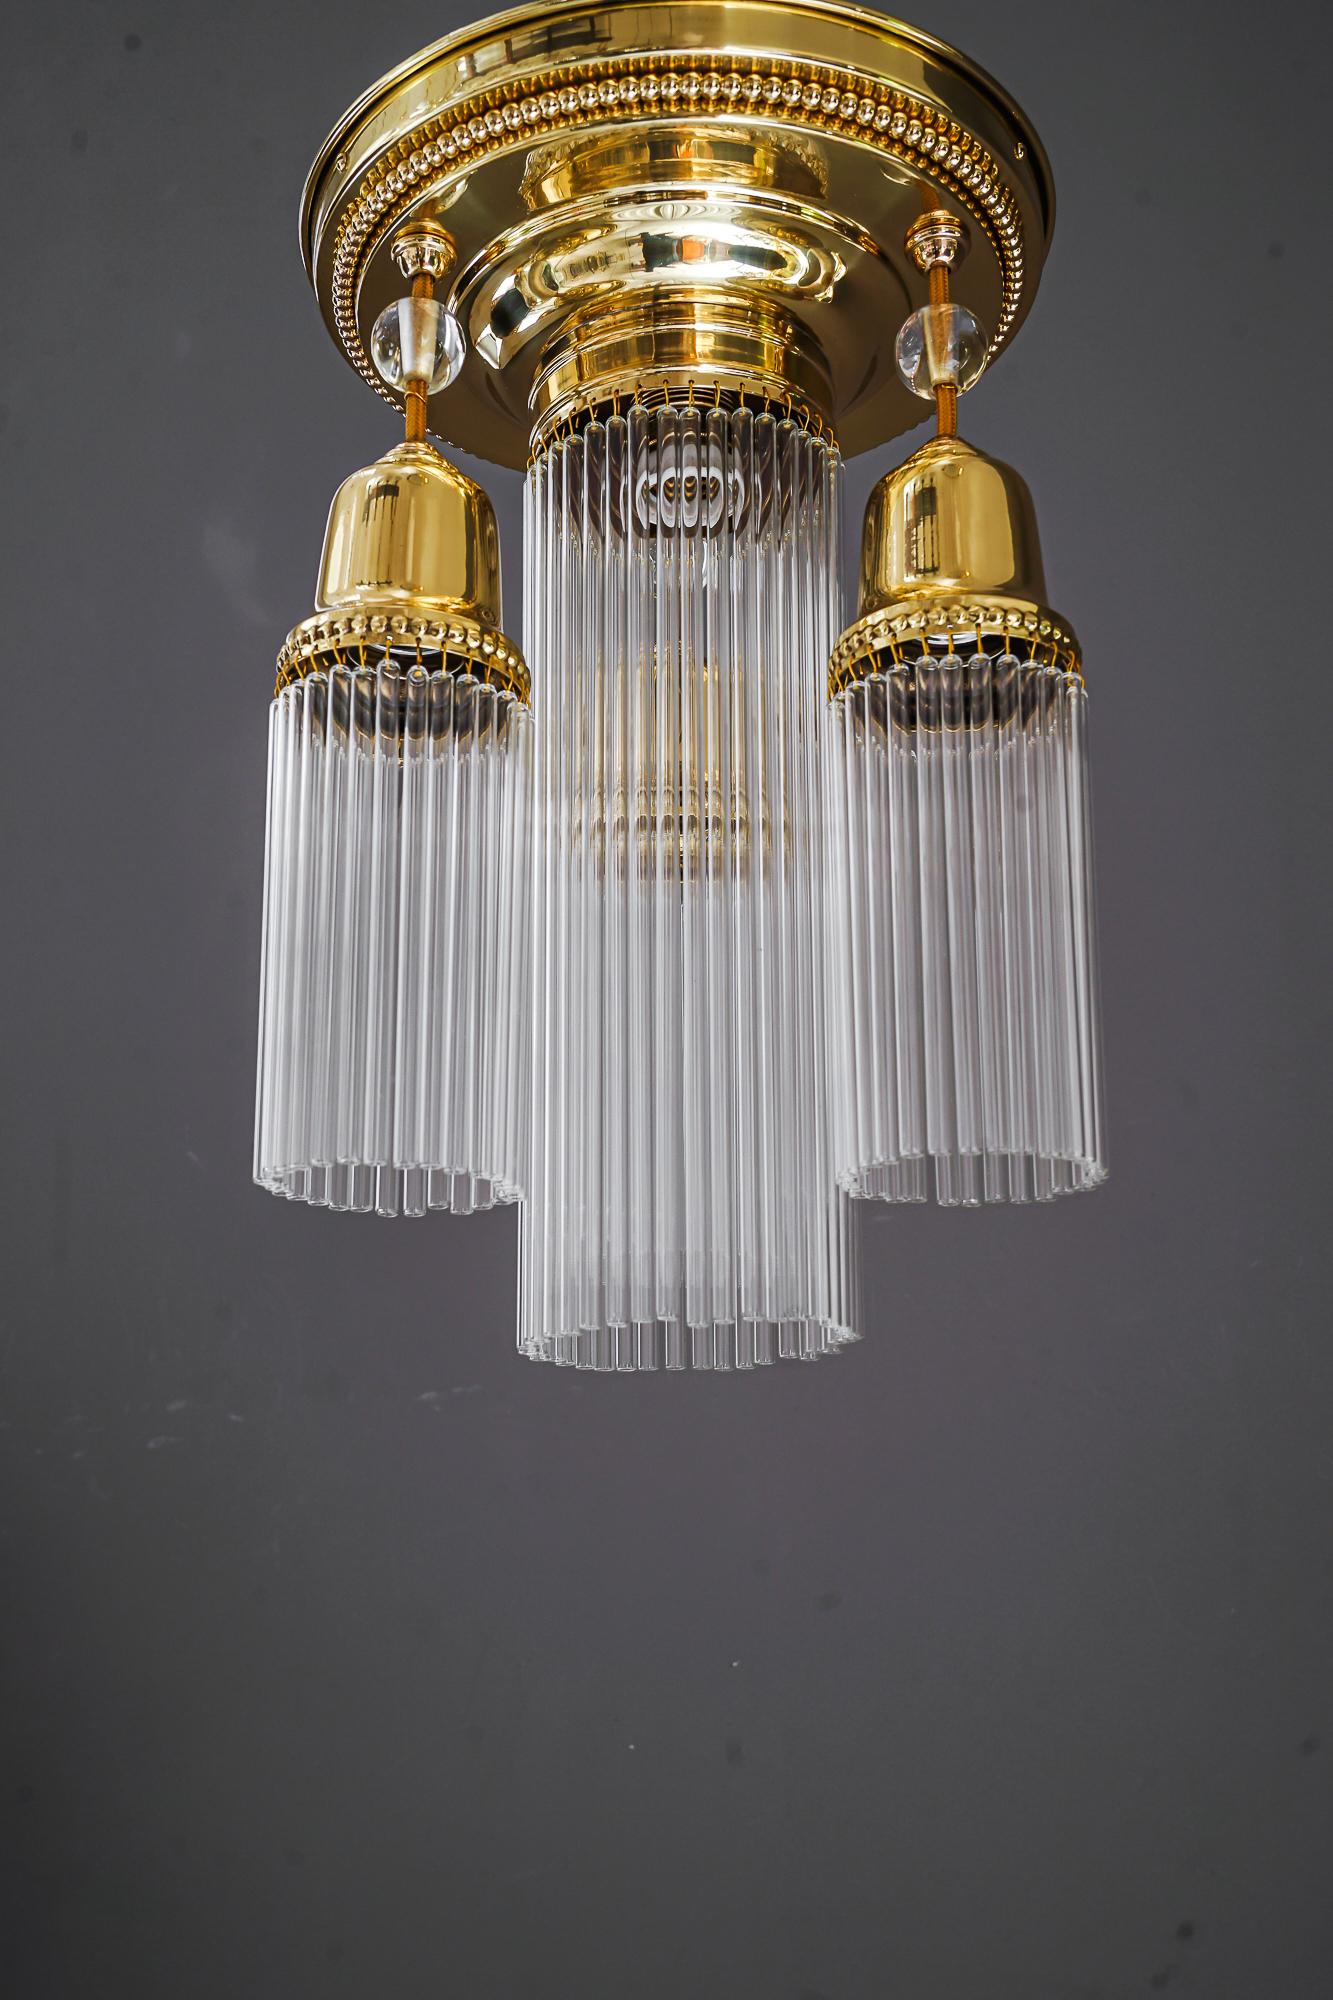 Lacquered Art Deco Ceiling Lamp with Glass Sticks, Vienna, Around 1920s